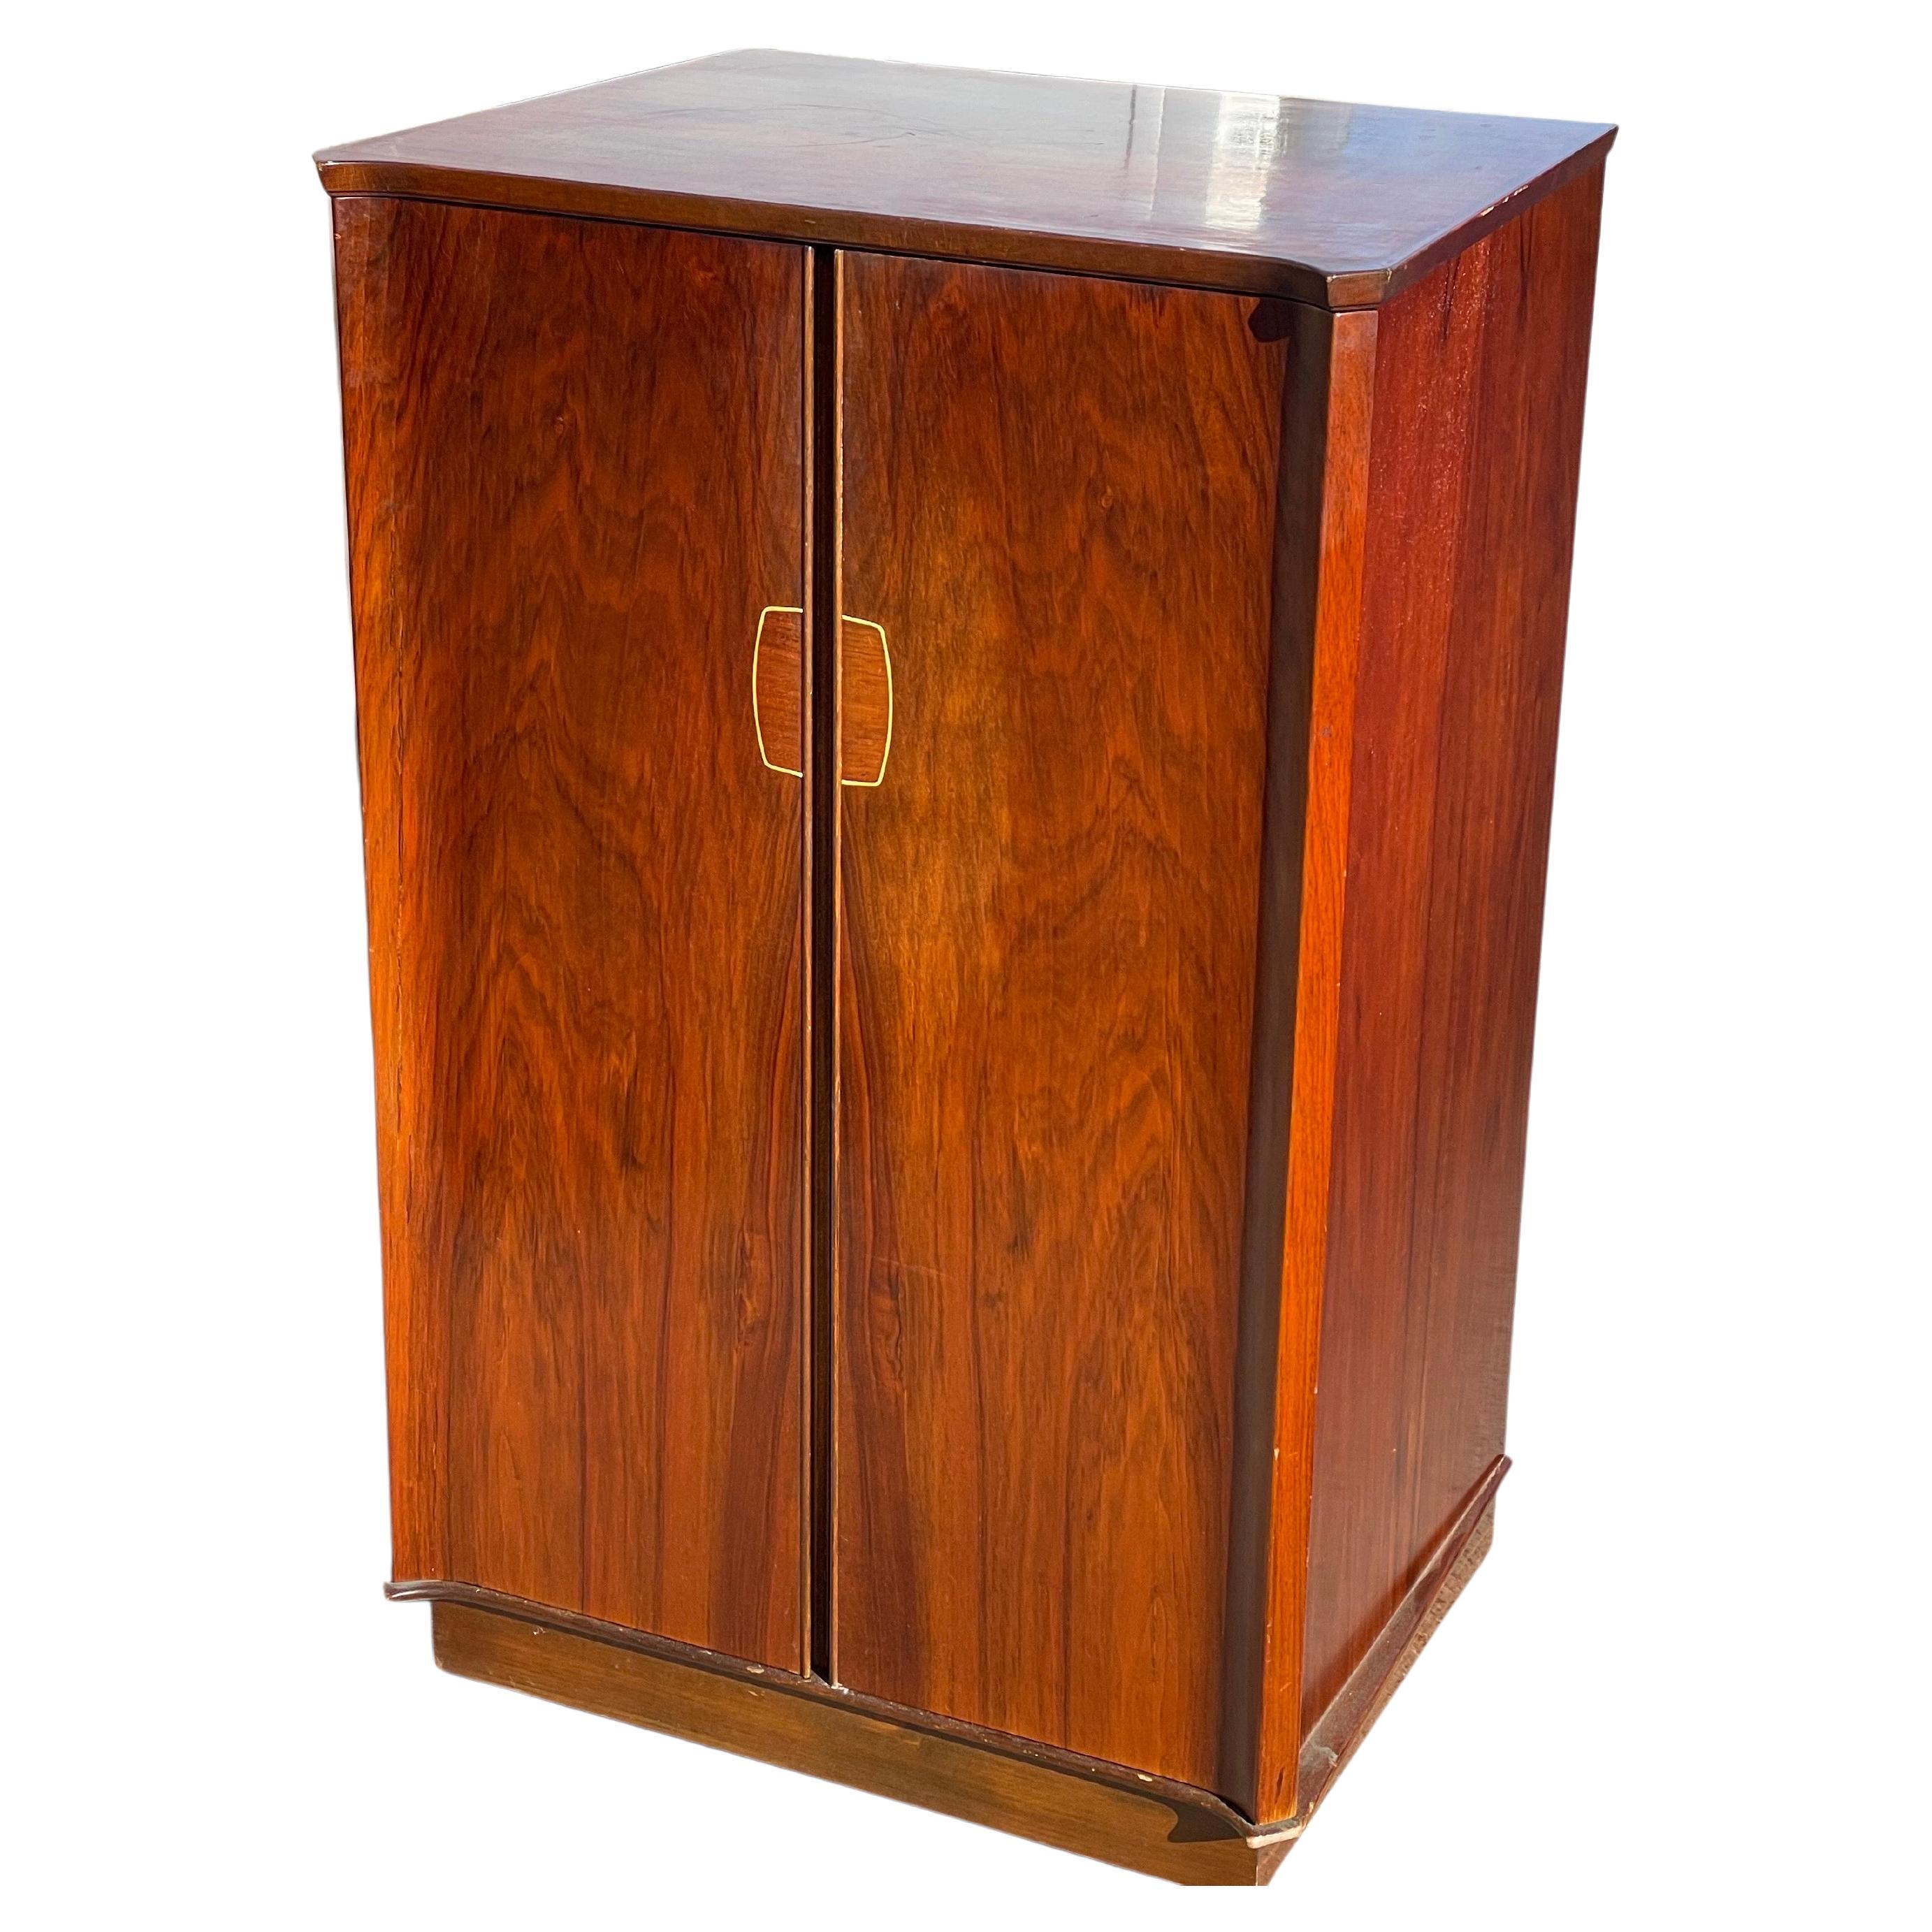 Introducing a piece of history - an Art Deco cabinet from the 1930's that has been repurposed as a bar/fridge, but with endless possibilities for customization. This unique piece of furniture design is a true statement piece that will always stand